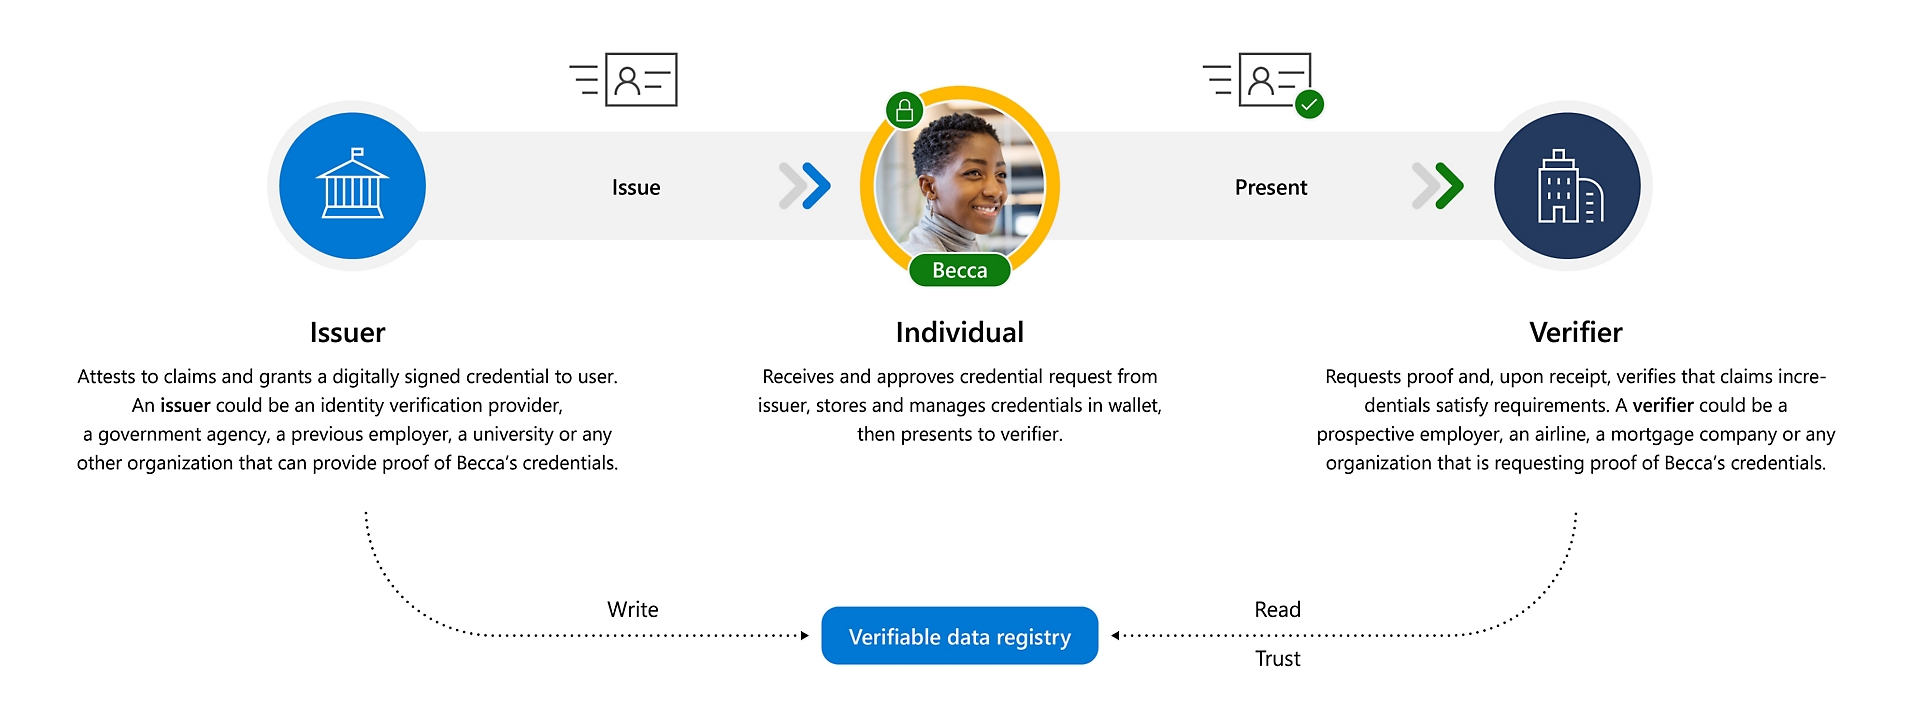 s Seller Identity Verification Process: From Simple